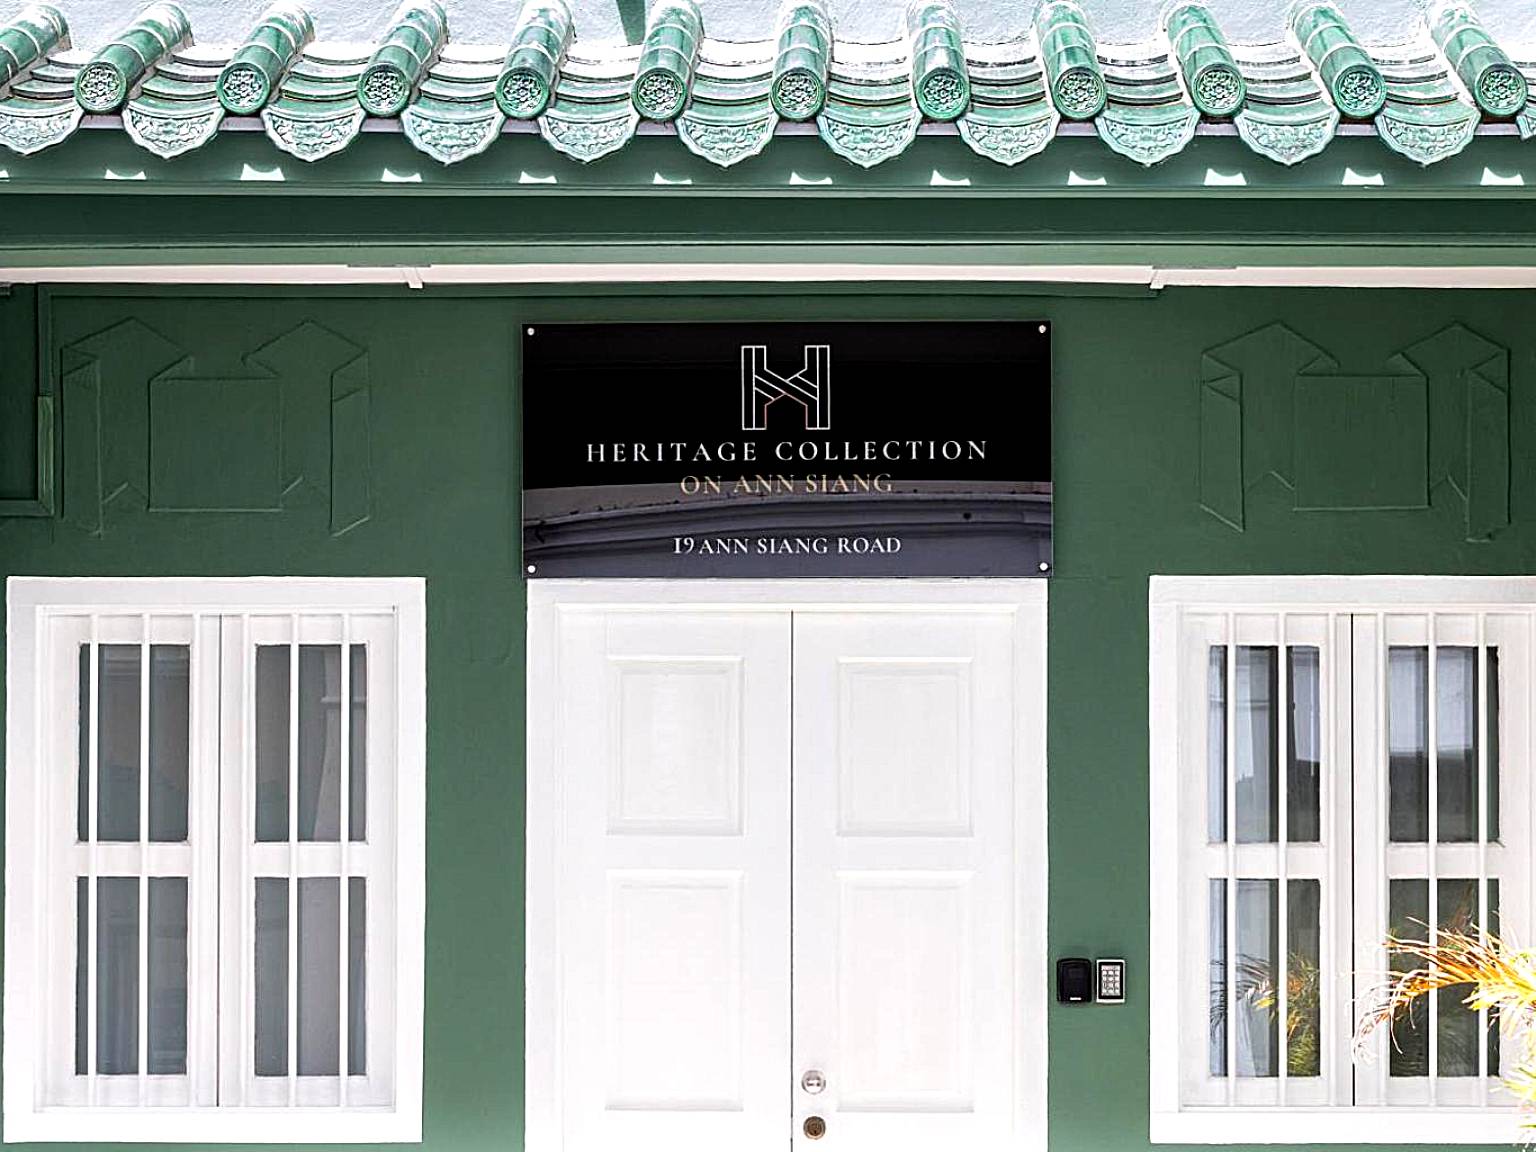 NEWLY REFURBISHED - Heritage Collection on Ann Siang